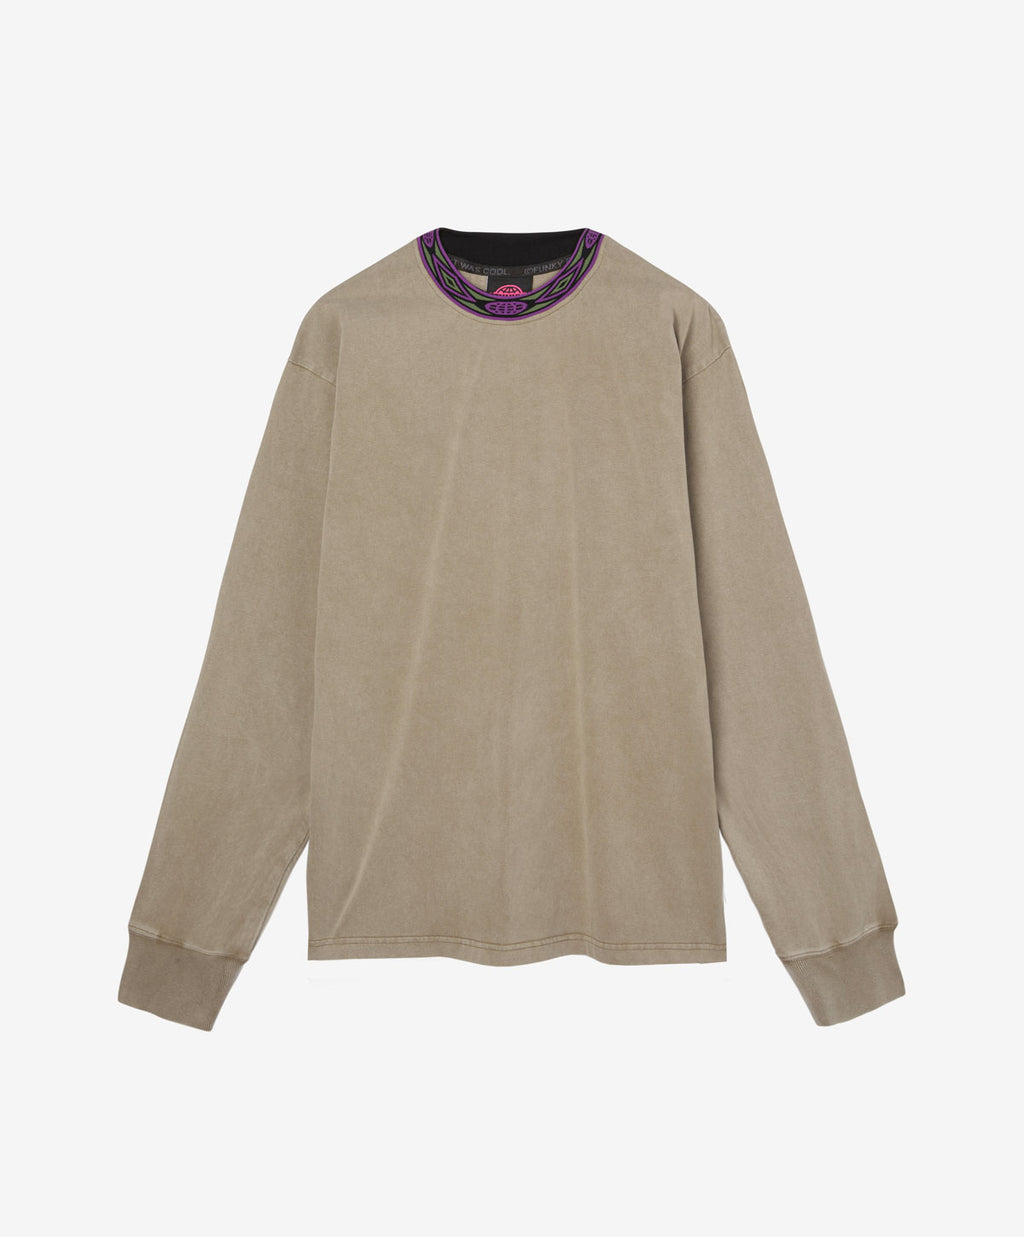 WOVEN LONG SLEEVE TEE WASHED SAND